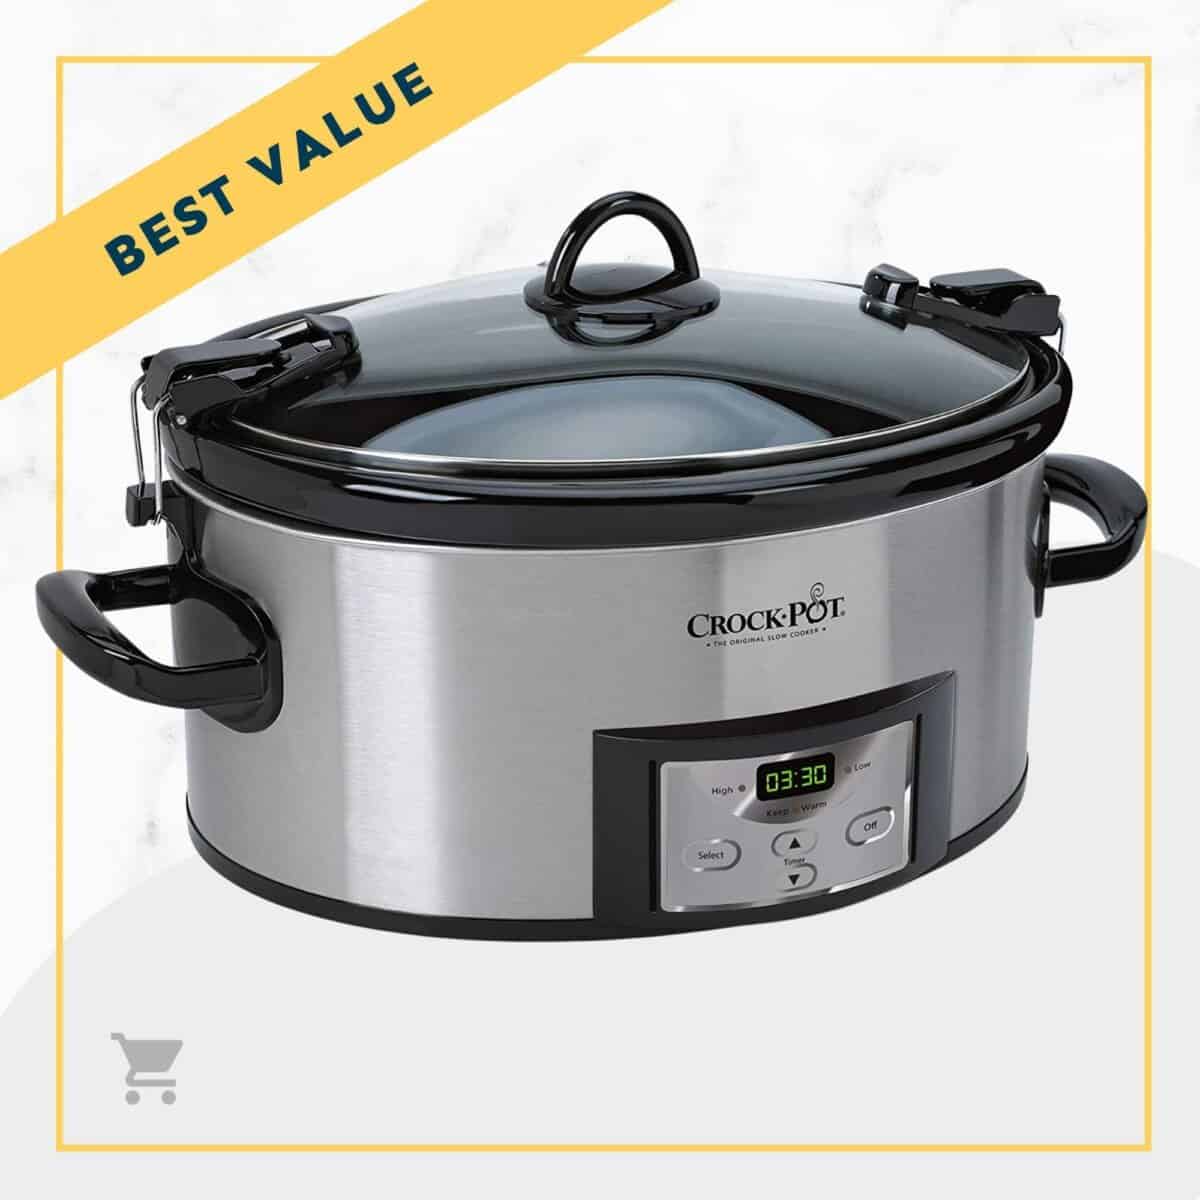 A crock pot with the text best value.